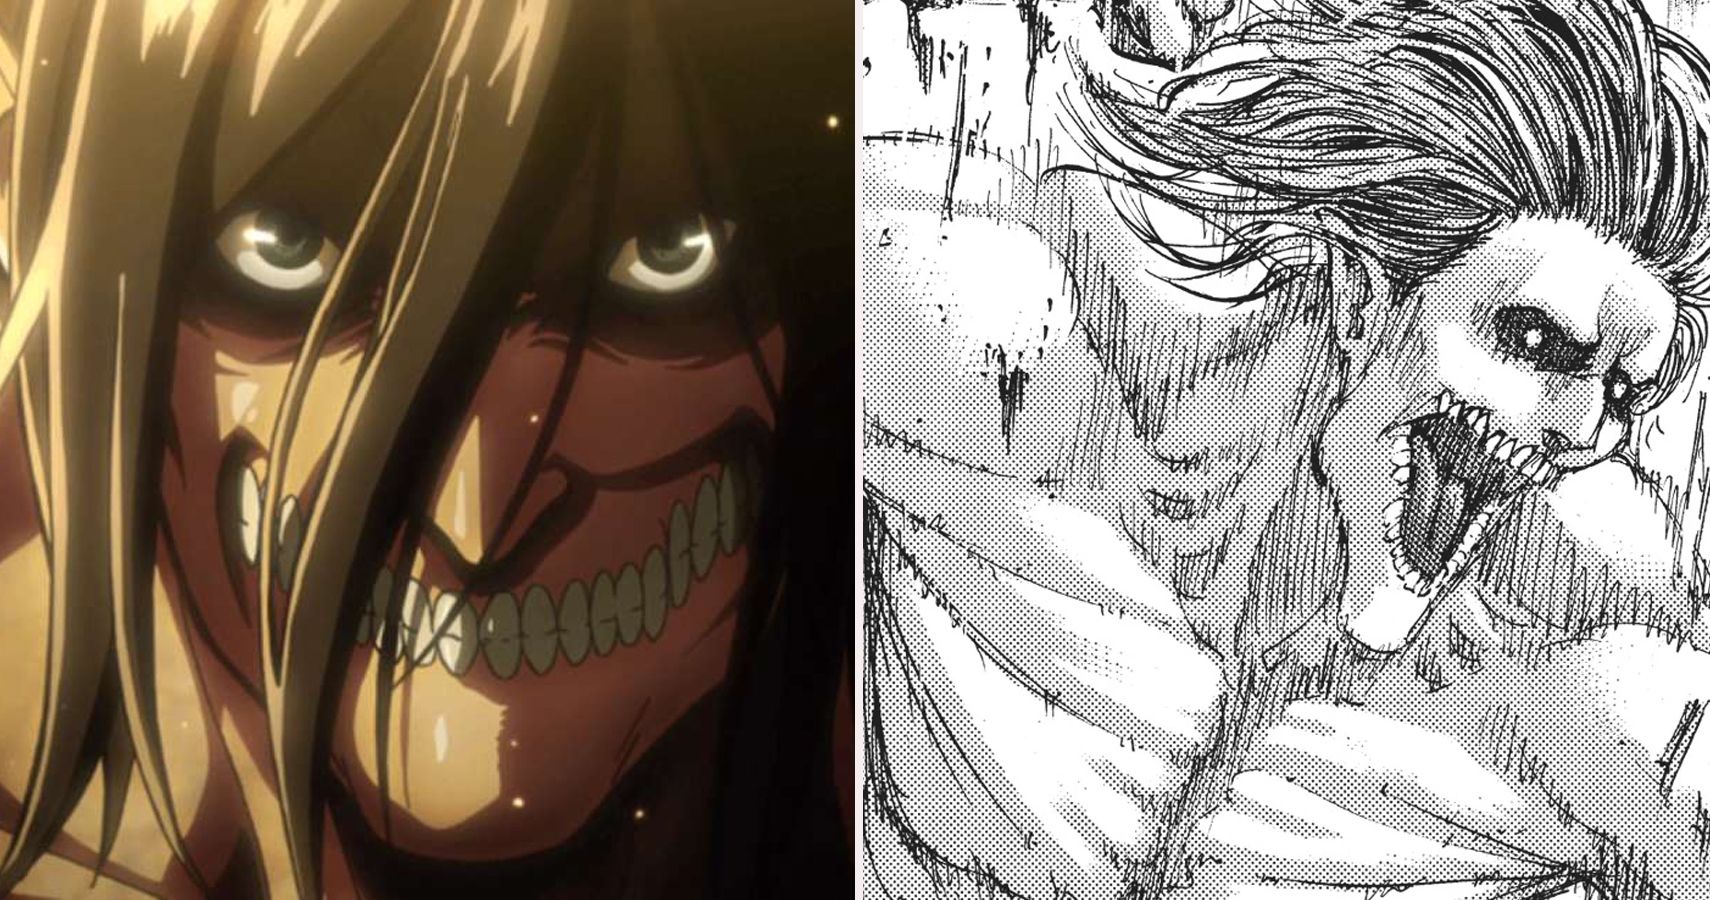 Attack On Titan: 10 Differences Between The Anime & The Manga